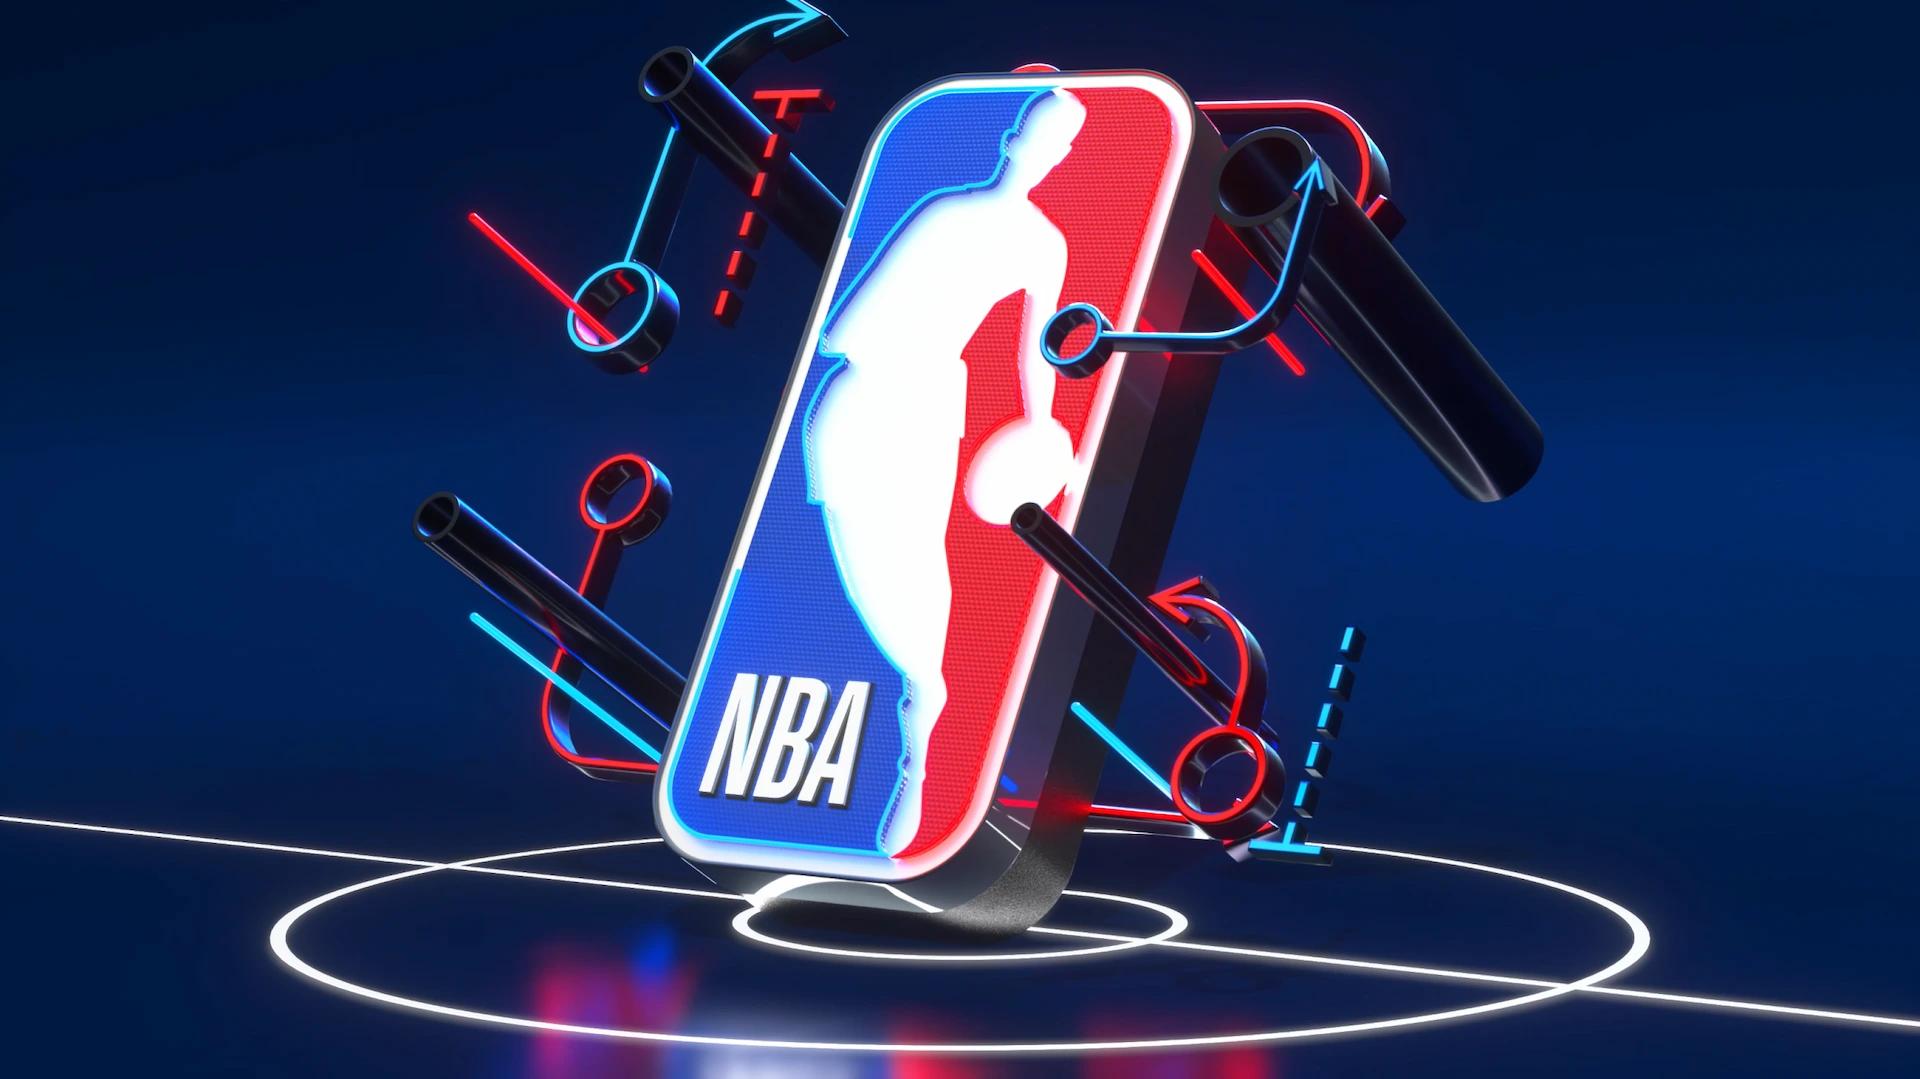 Stylized visual elements from a playbook around the NBA logo